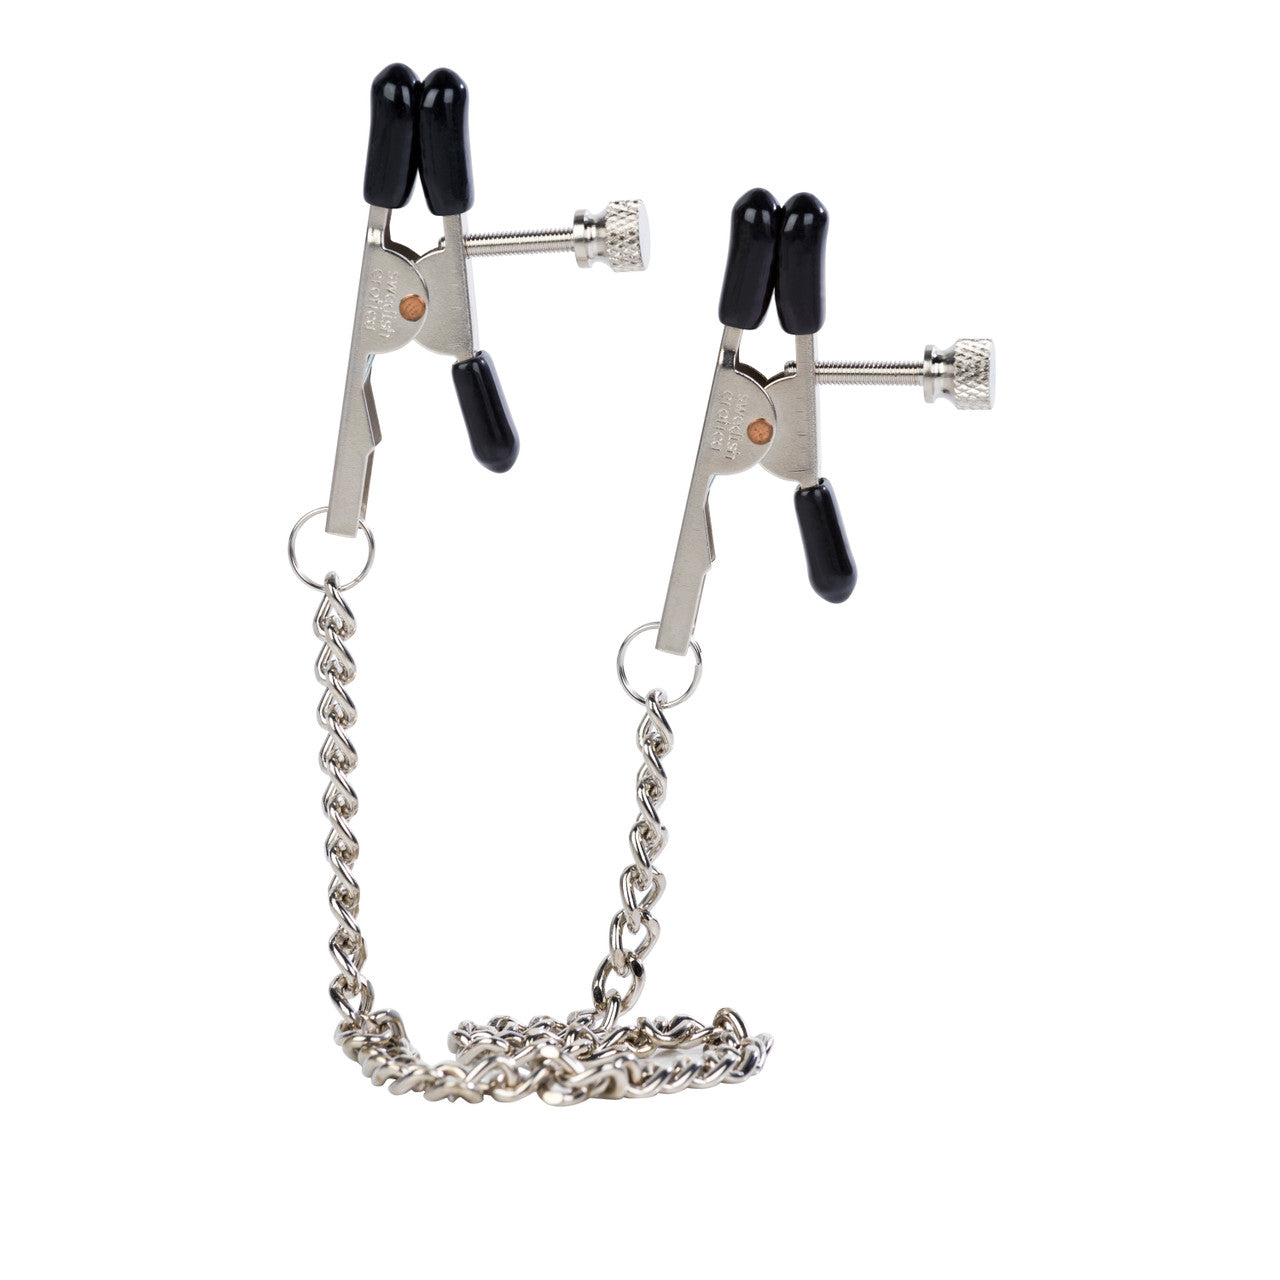 Nipple Play Bull Nose Nipple Clamps - Thorn & Feather